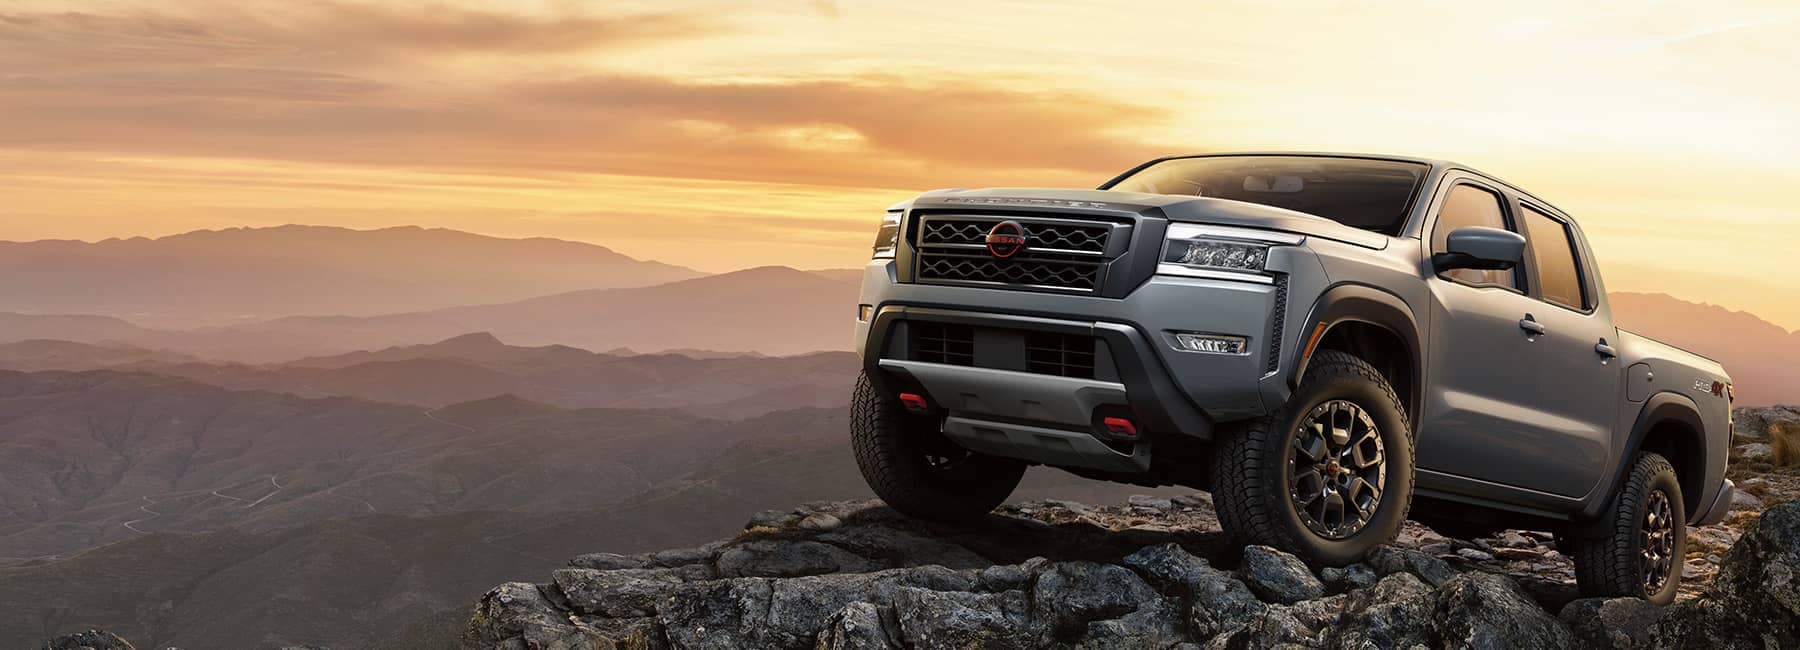 2022 Nissan Frontier at sunset_mobile